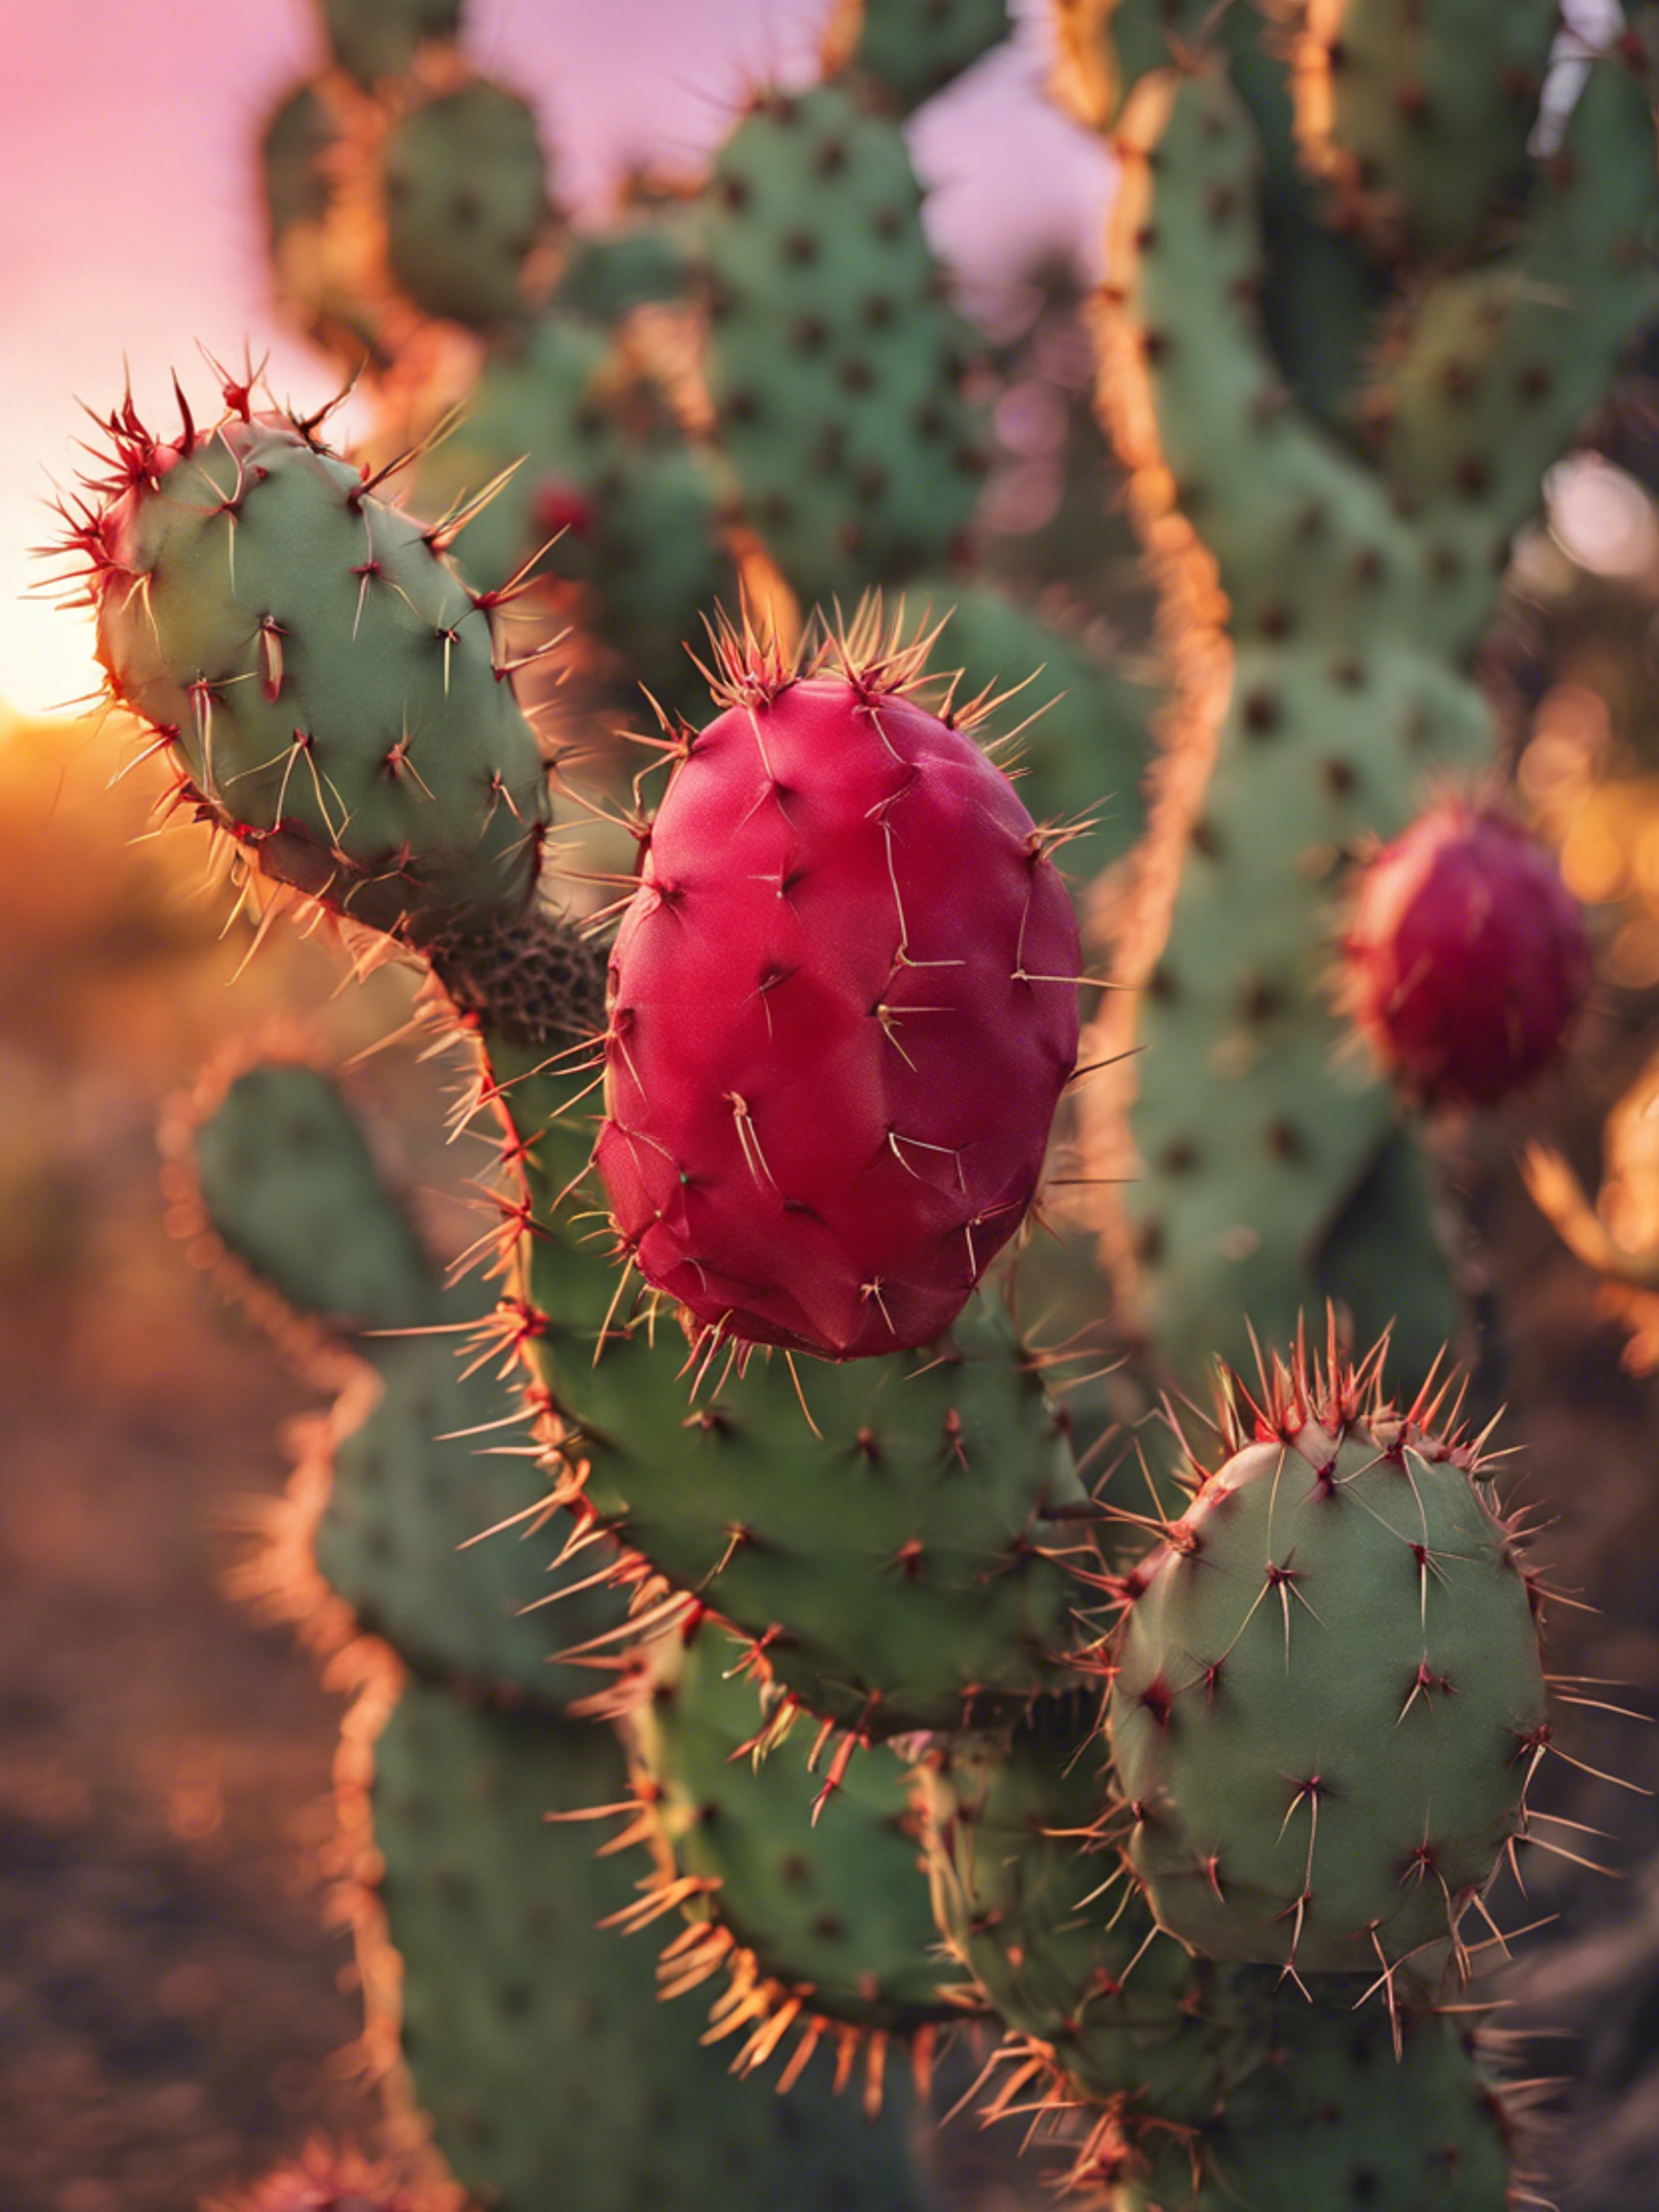 A prickly pear cactus with ripe, red fruits against a sunset background. טפט[5965817ee192450fa25b]